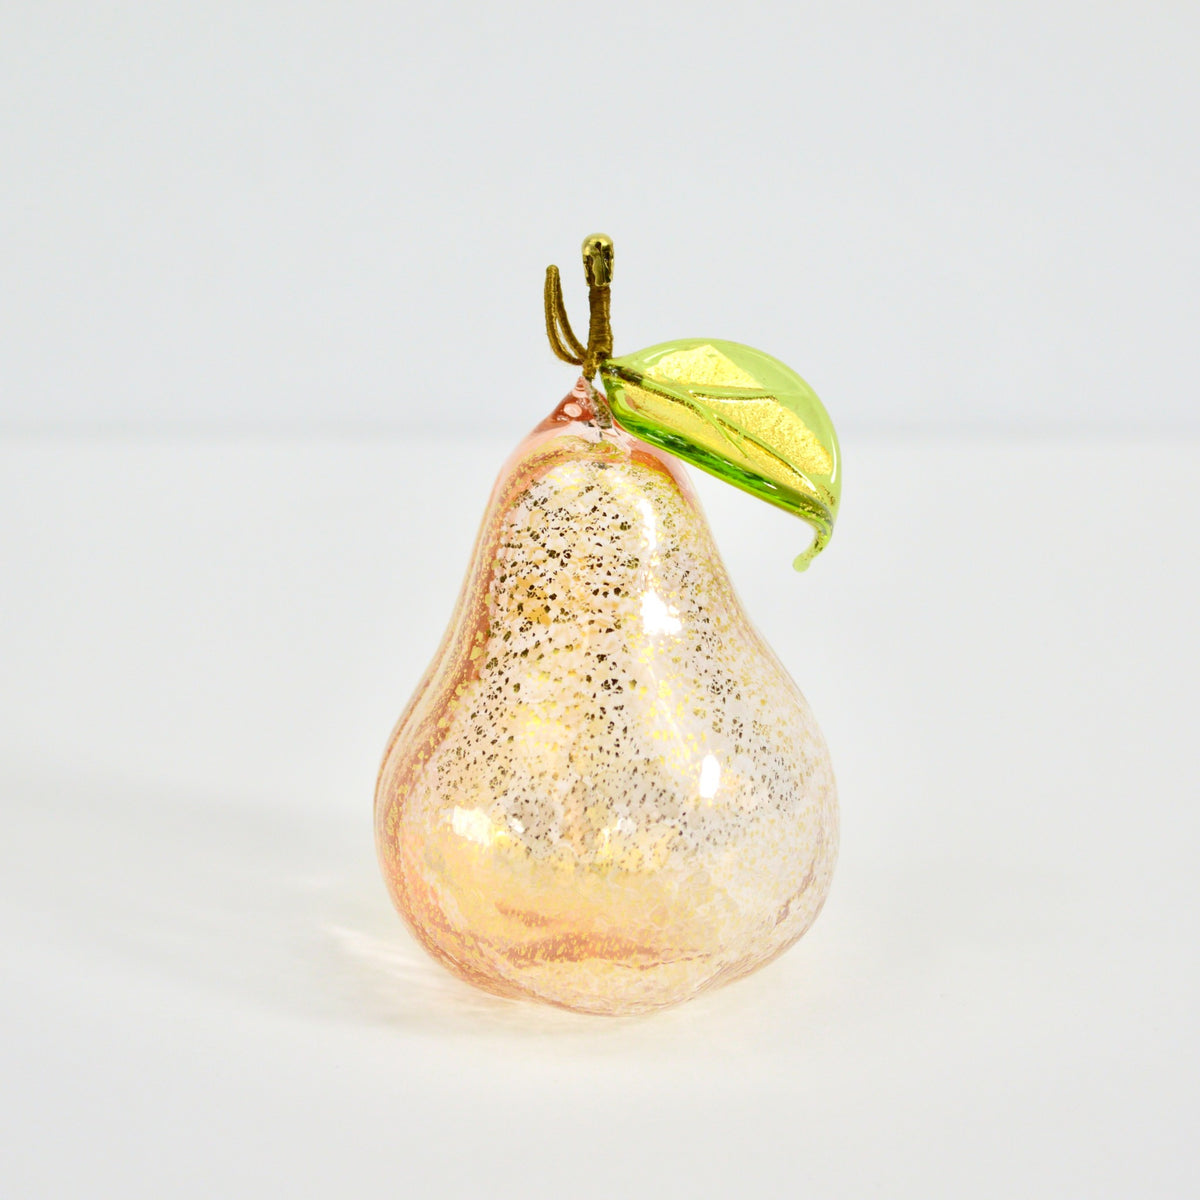 Murano Glass Blown Pear with Gold Foil, Ornament, Made In Italy, Gift Idea